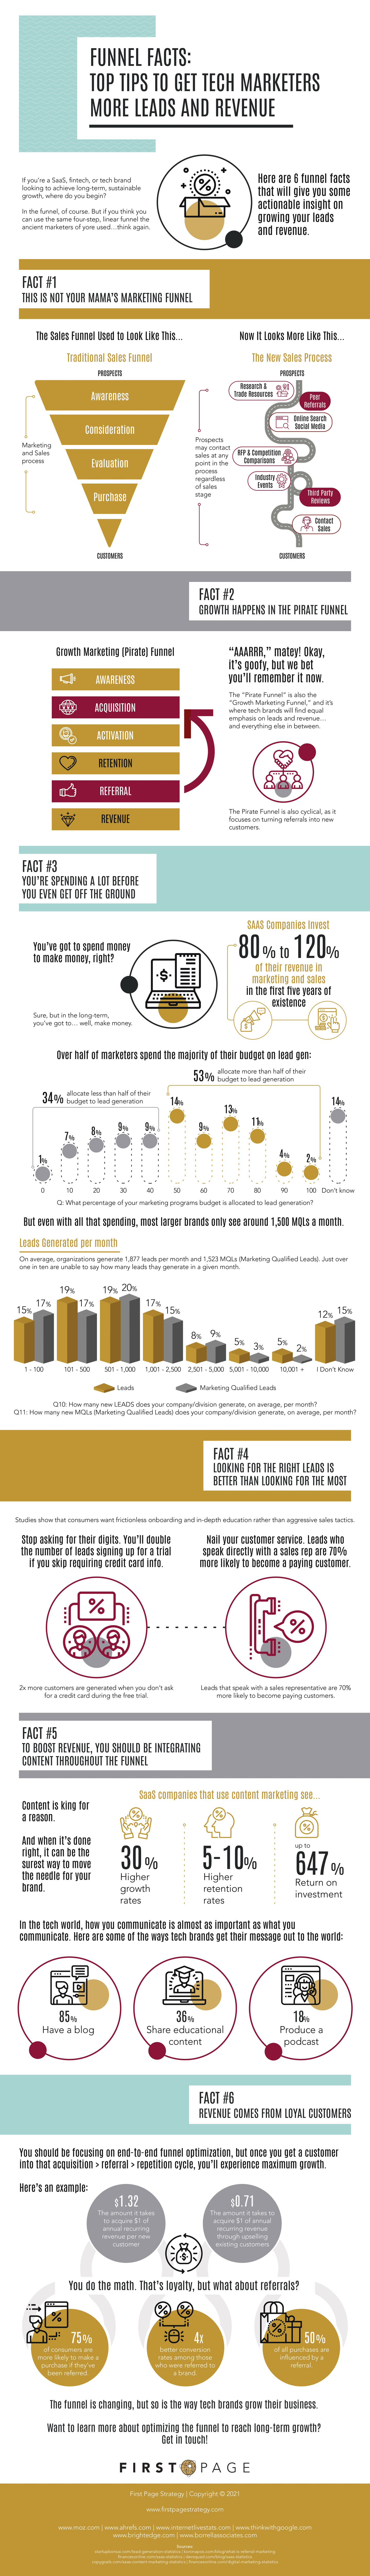 infographic about More Leads & More Revenue: [x] Growth Facts about the Tech Marketing Funnel